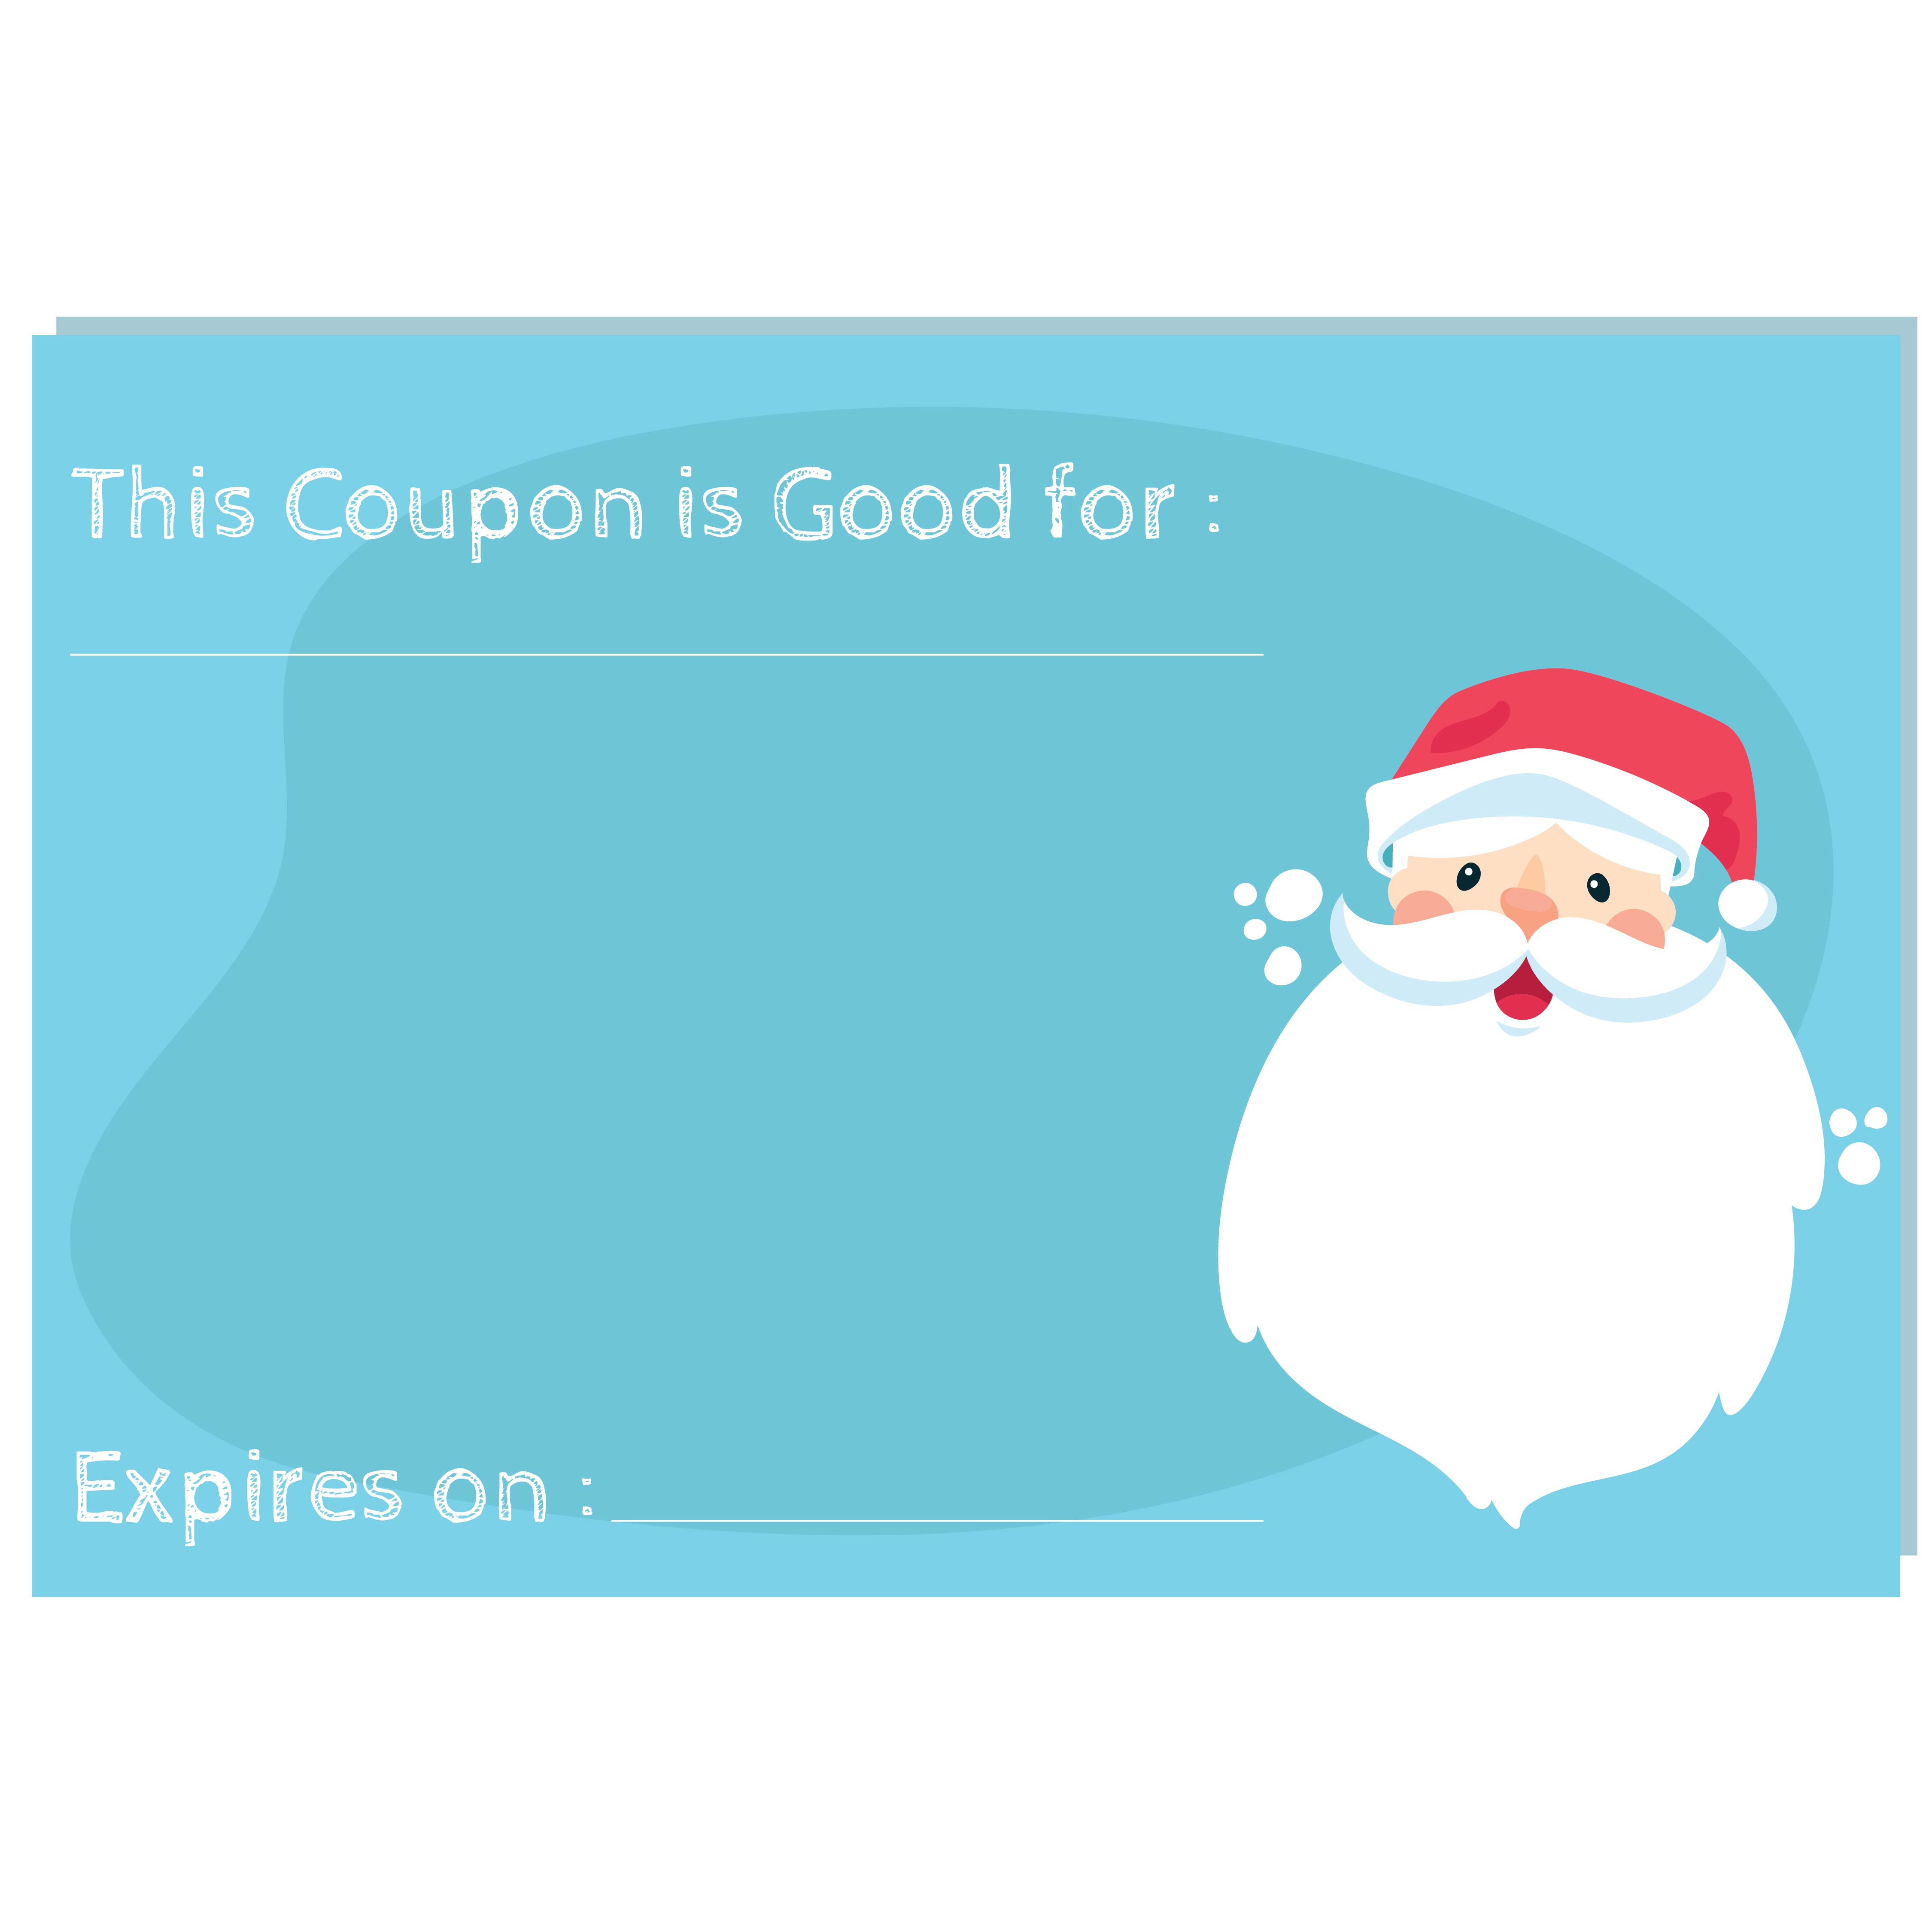 7-best-images-of-printable-christmas-voucher-templates-christmas-gift-voucher-template